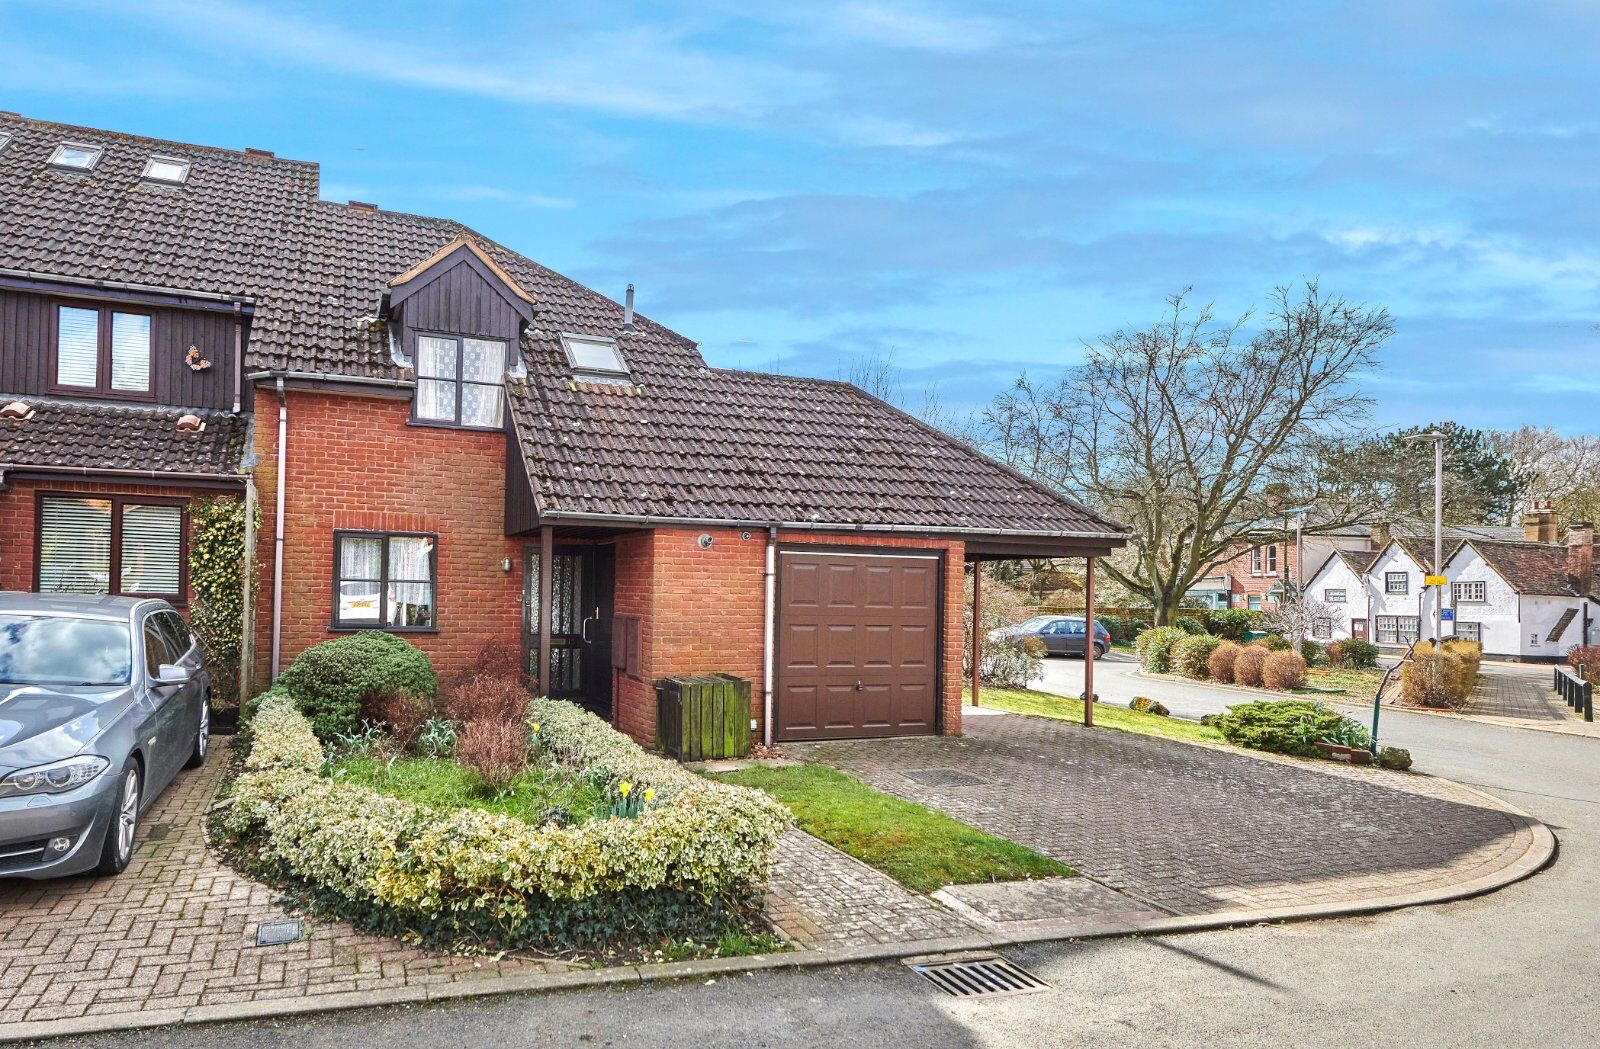 3 bedroom end terraced house for sale Mount Road, Wheathampstead, AL4, main image